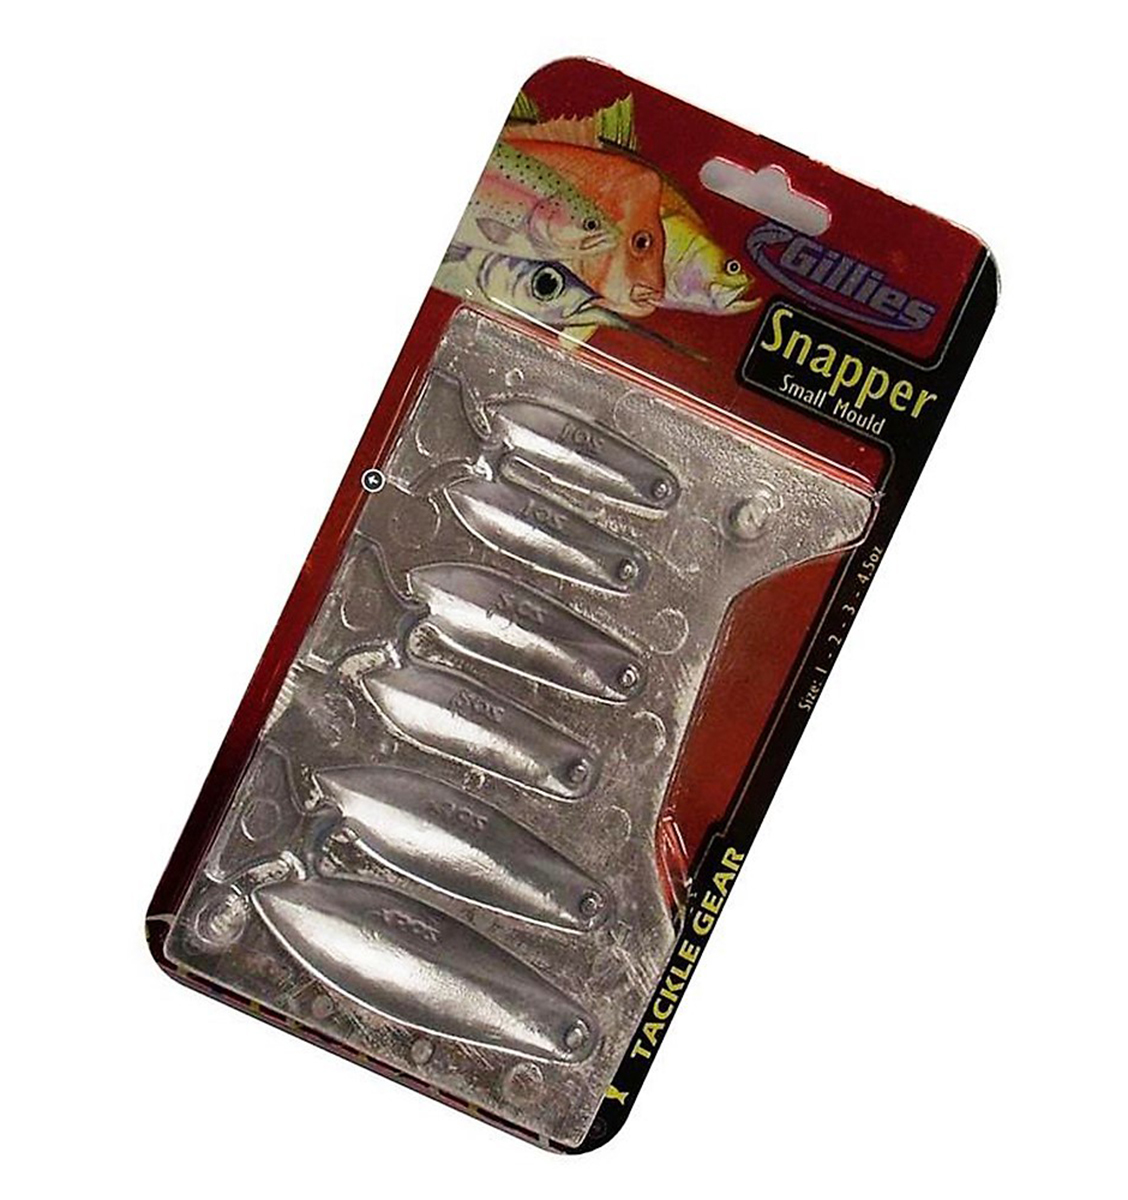 Gillies Small Snapper Sinker Mould Combo-Makes 4 Different